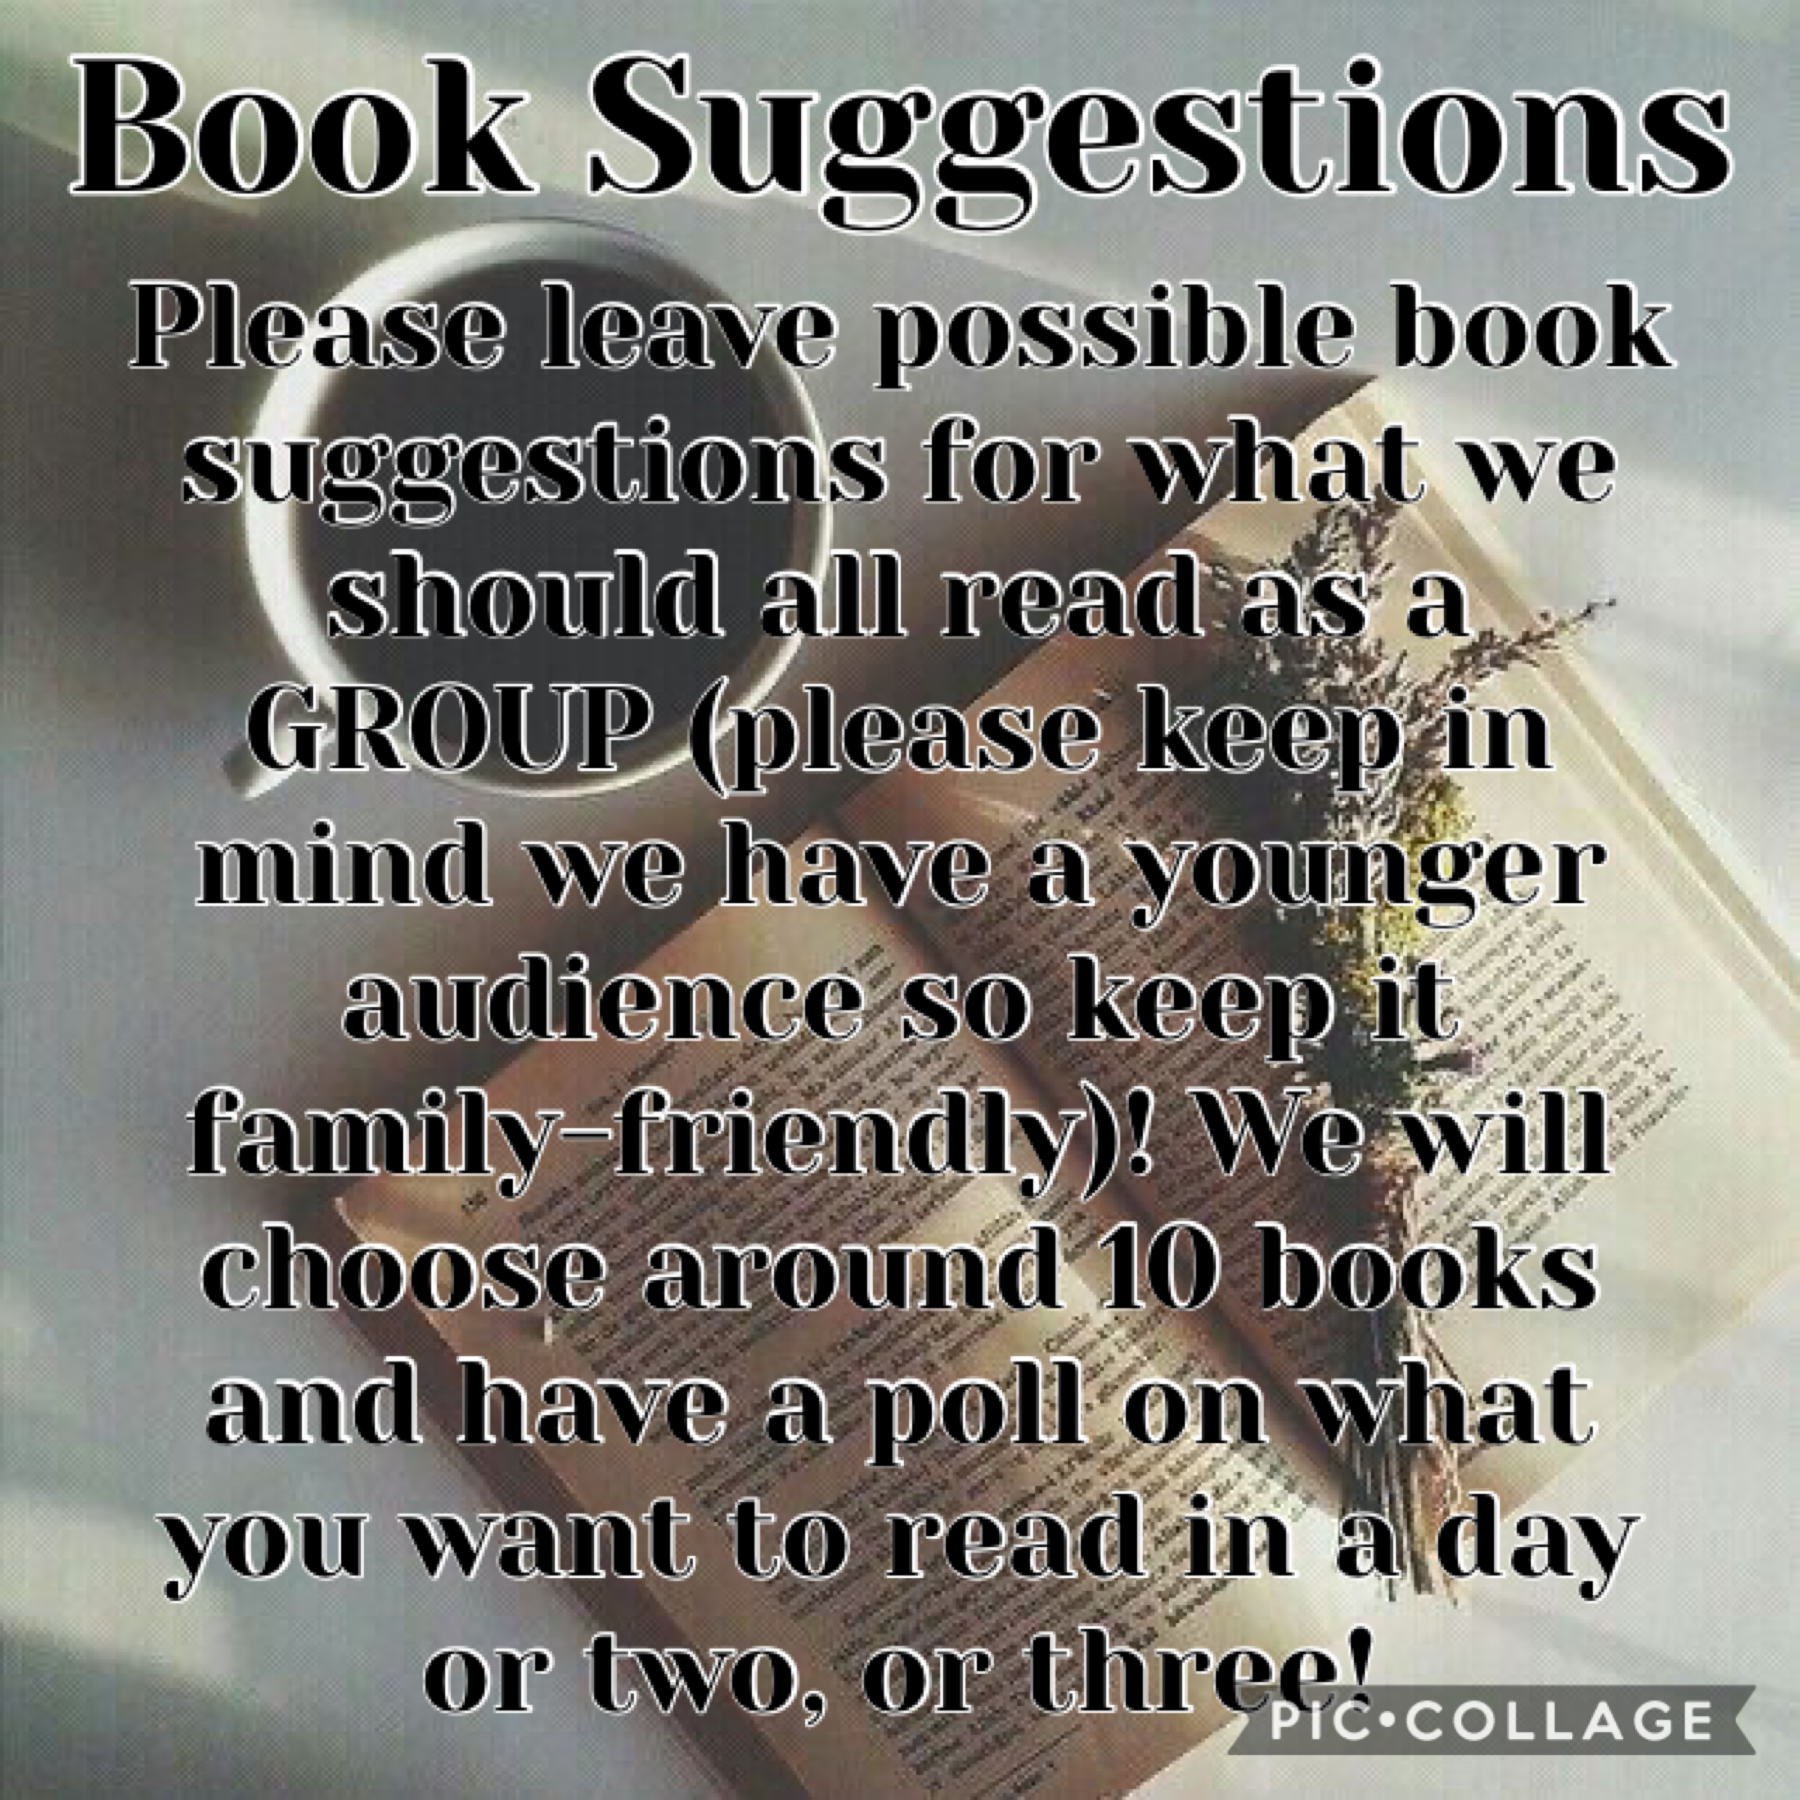 What books should we read? Keep it family friendly! Please a chapter book. :) 